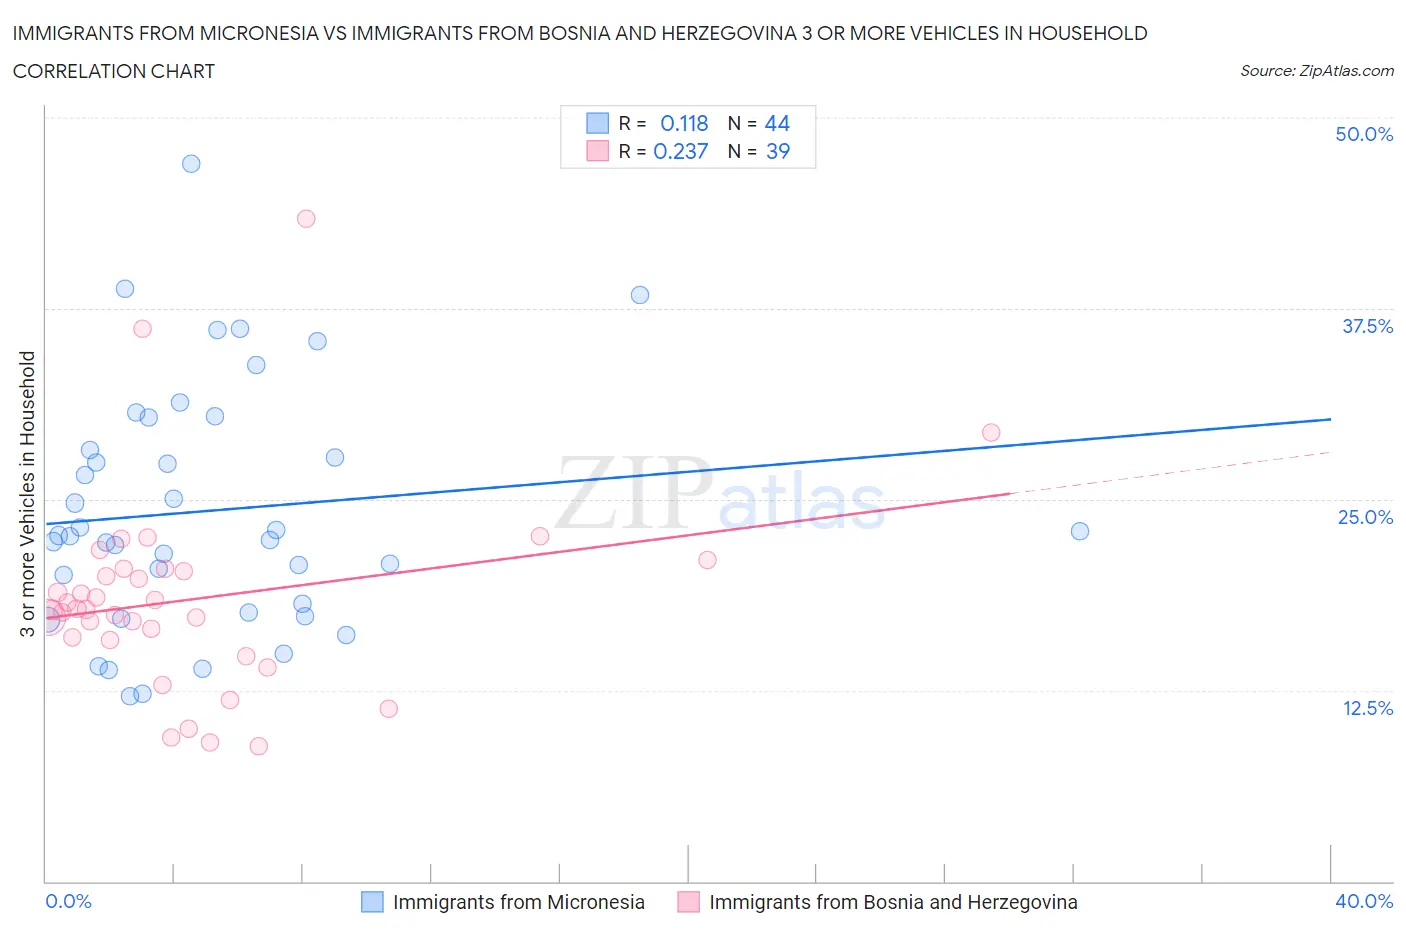 Immigrants from Micronesia vs Immigrants from Bosnia and Herzegovina 3 or more Vehicles in Household